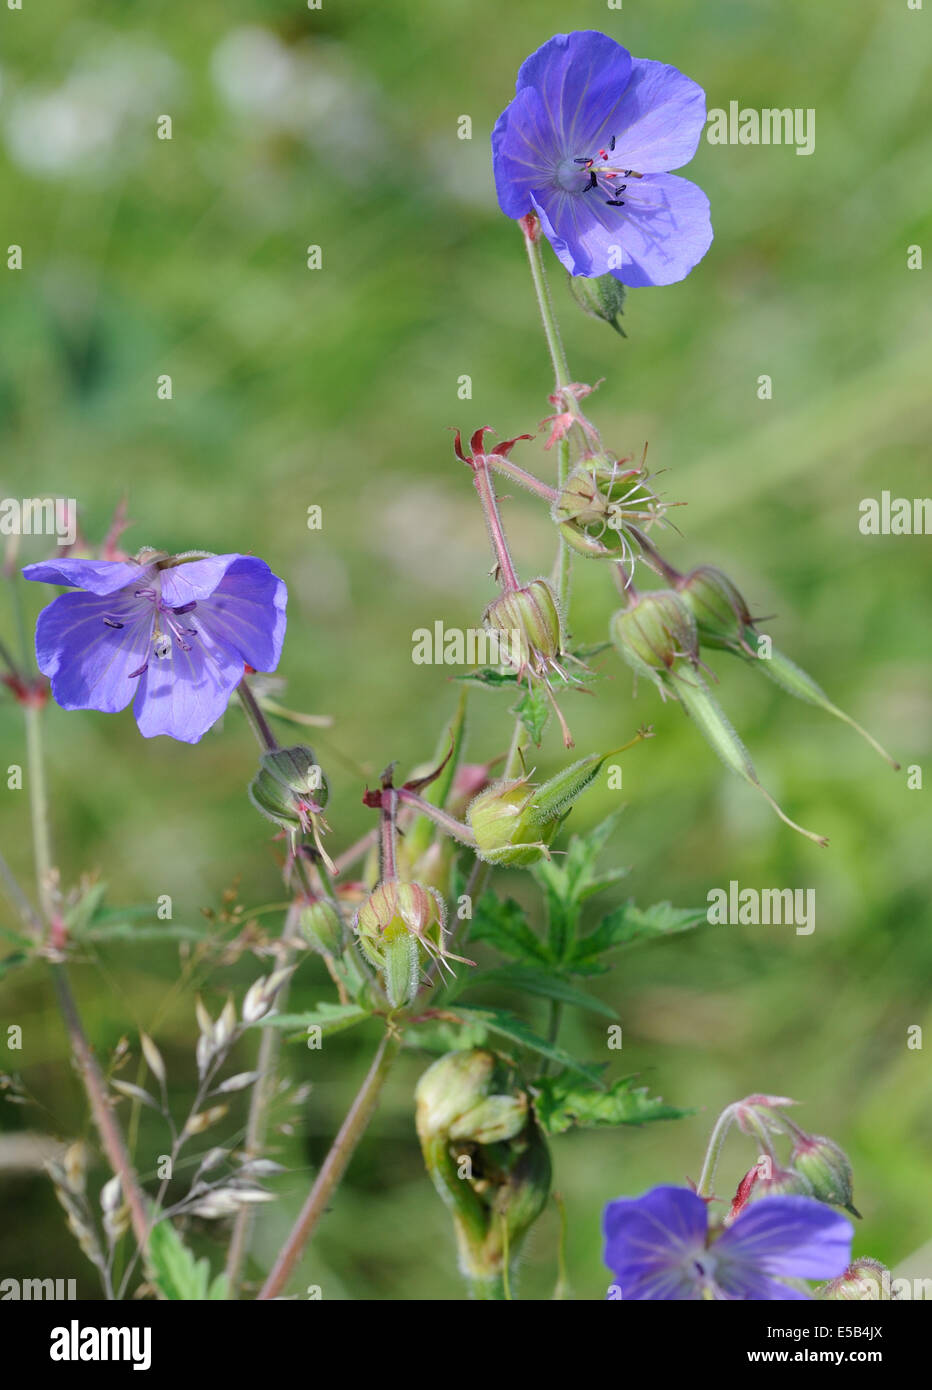 Meadow  Crane's-bill (Geranium pratense) flowers and seed heads in a wild flower meadow. Stock Photo